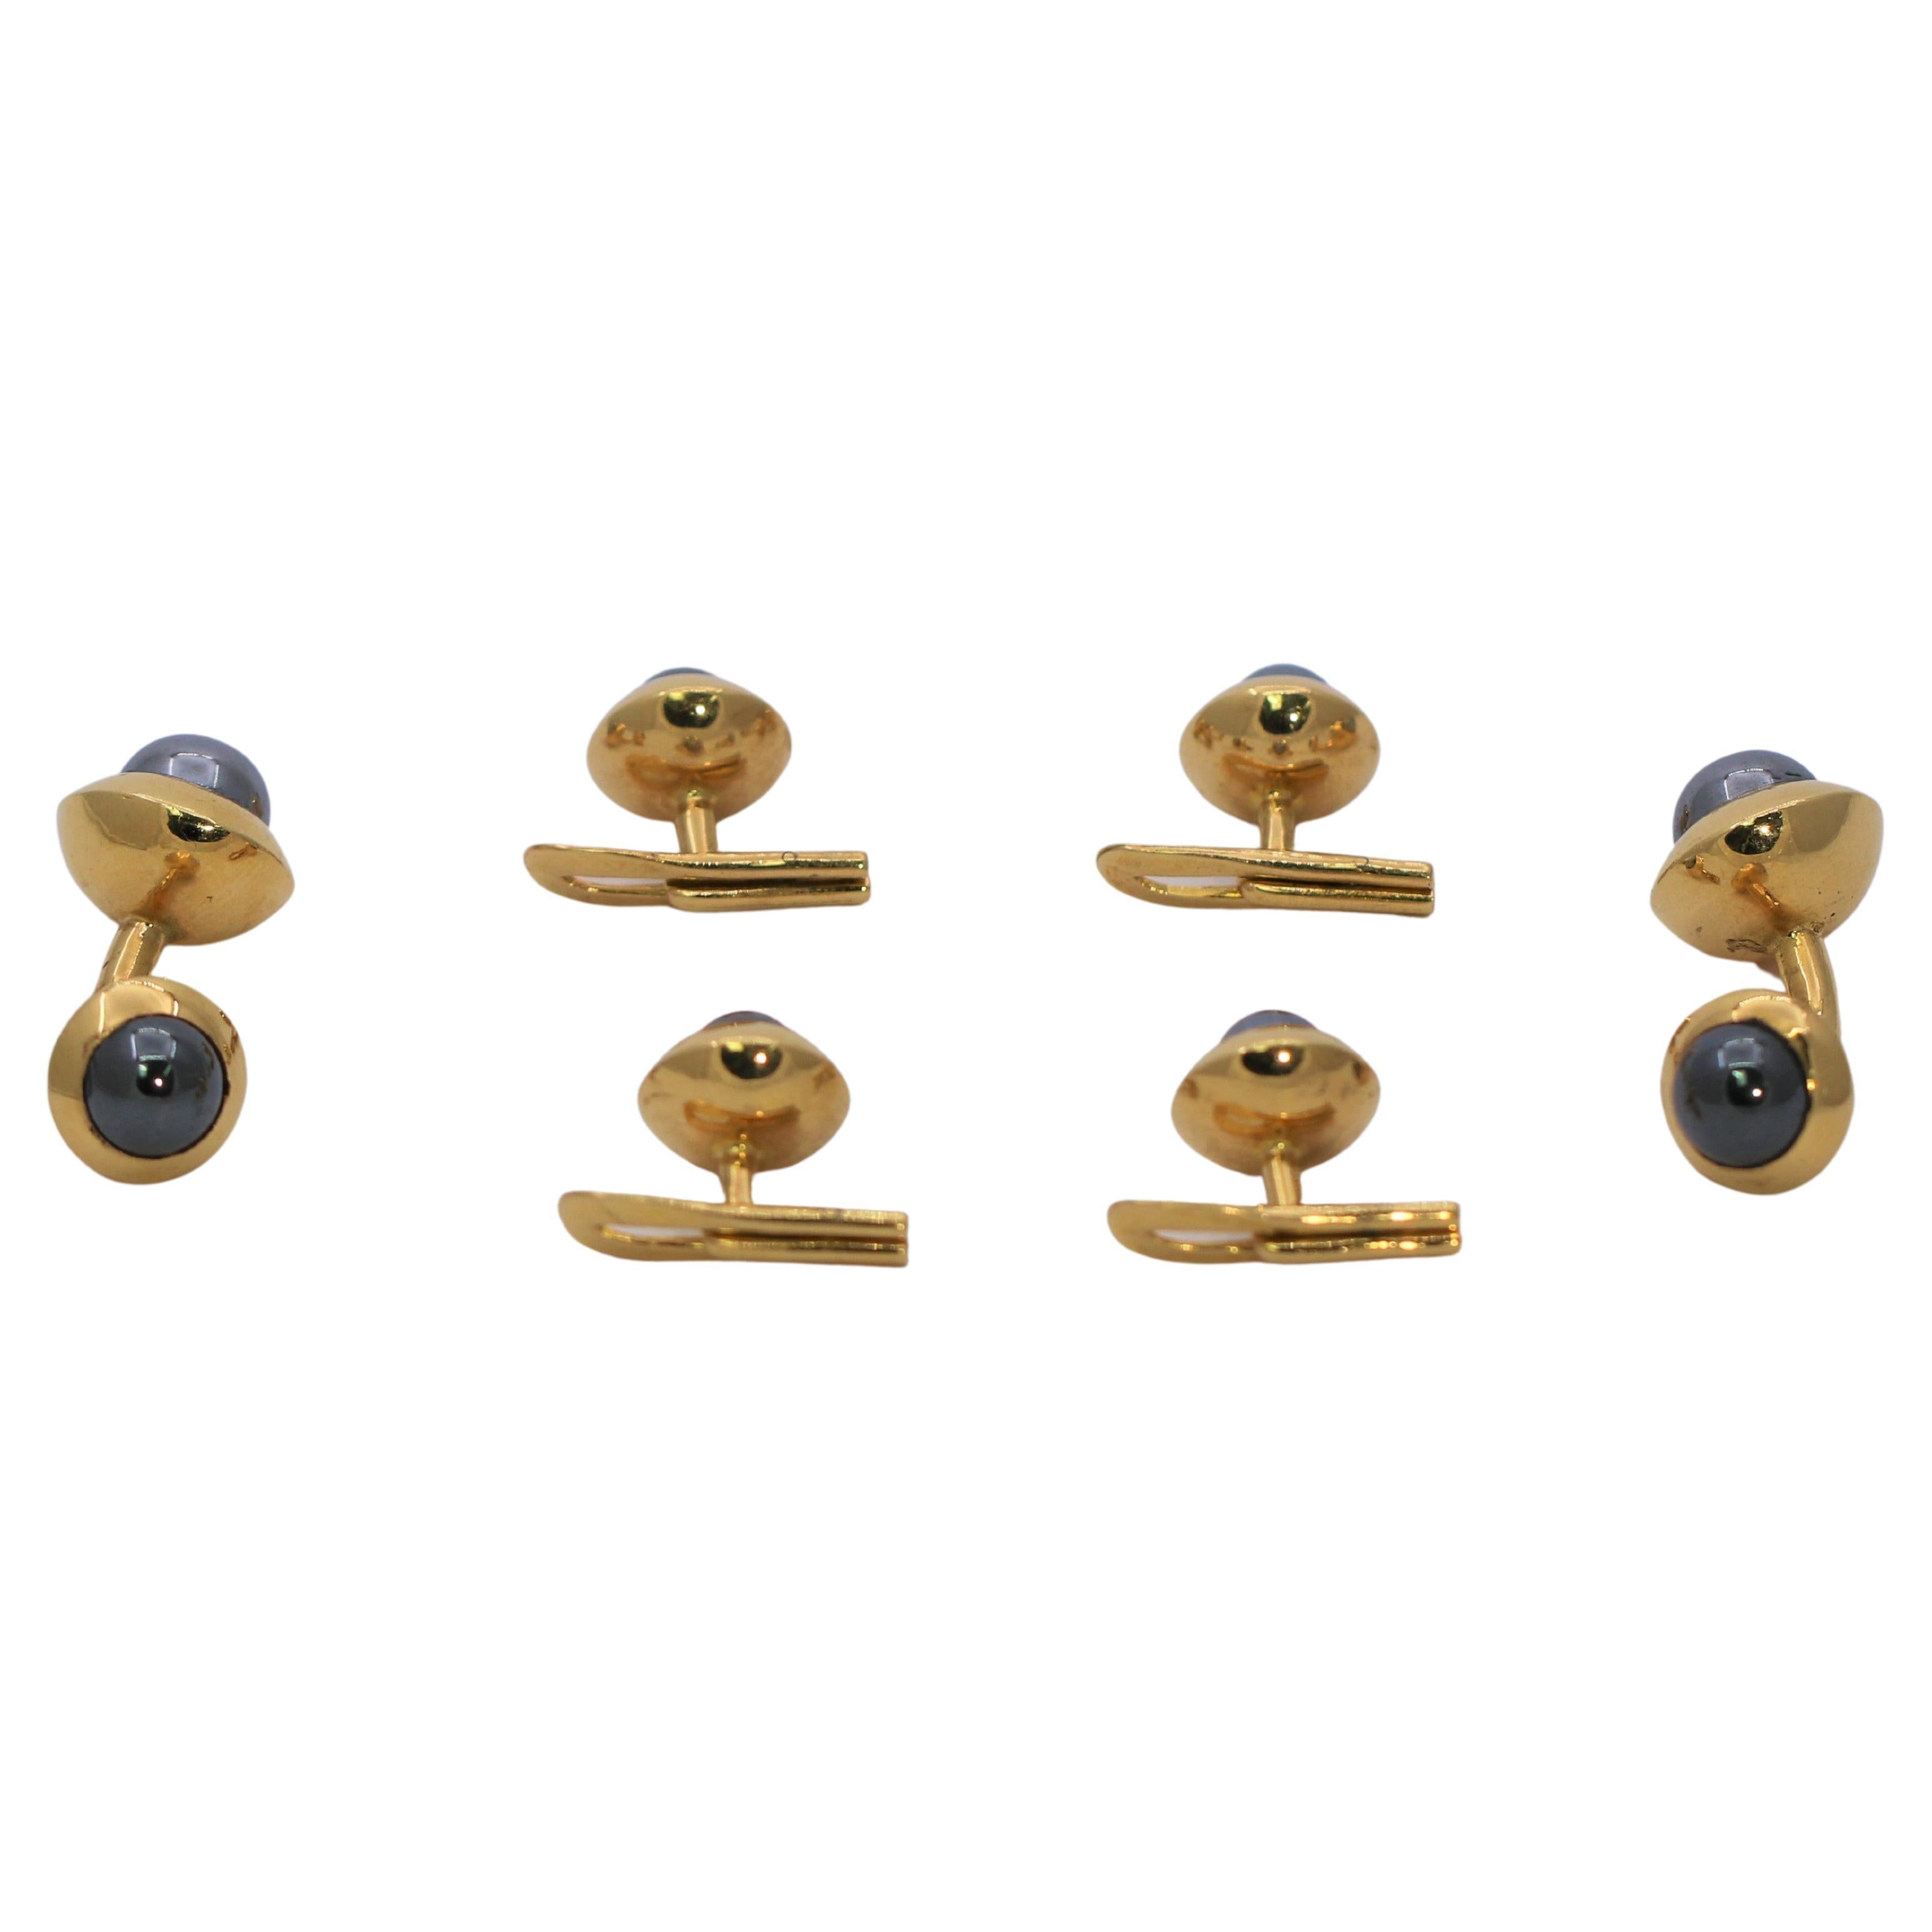 This simple but very chic 18k yellow gold French four button stud set is designed with one polished hematite bead surrounded by a wide bezel of gold on every piece. The beads measure from eight millimeters at the front of the cuff links, and 6.5